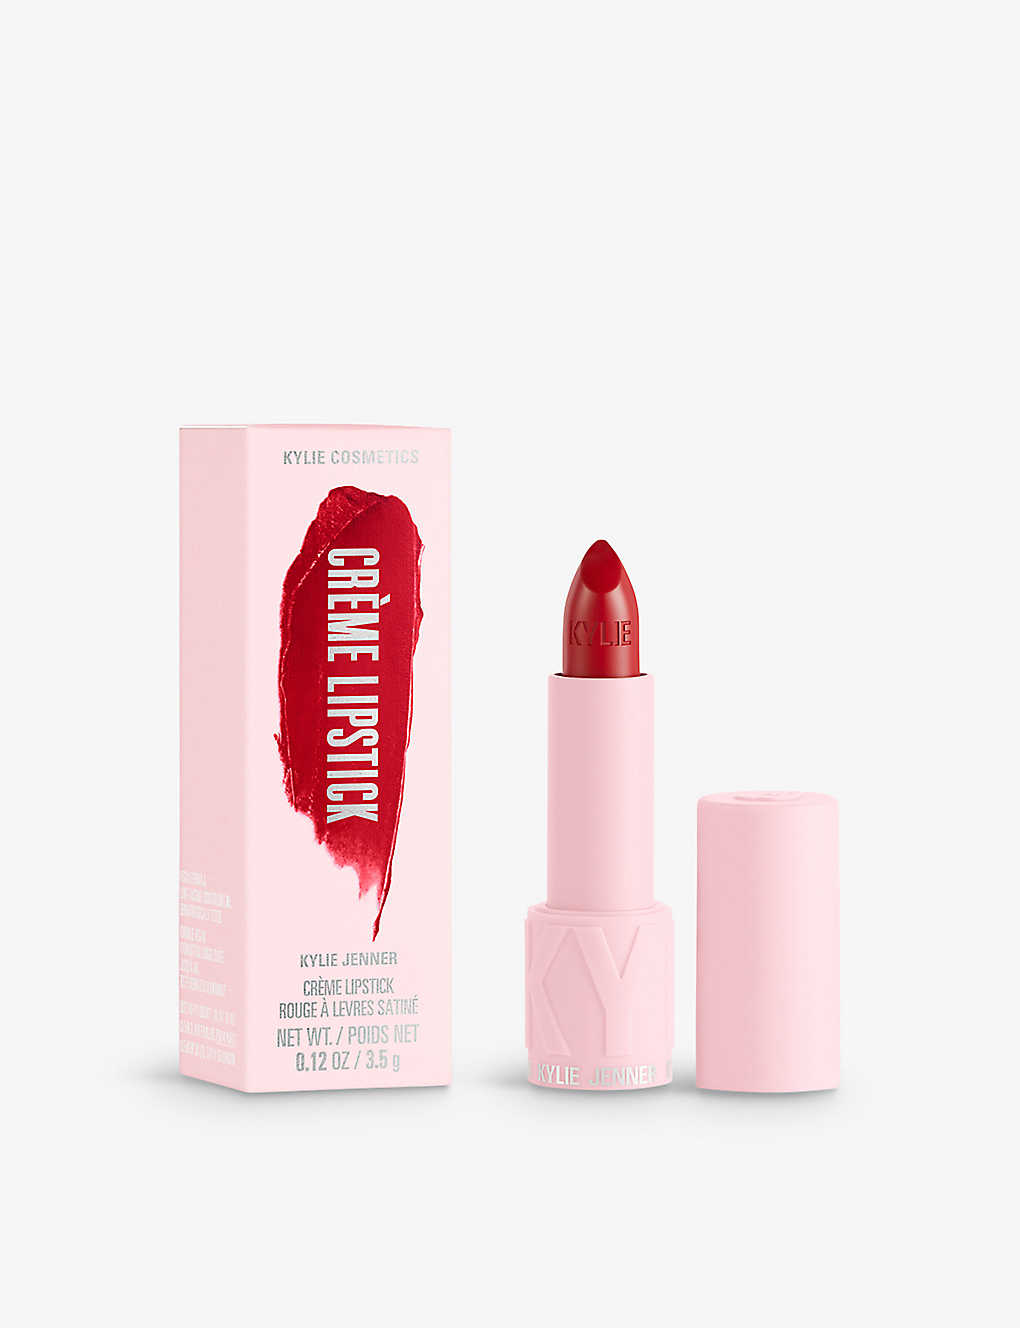 Kylie By Kylie Jenner Crème Lipstick 3.5g In The Girl In Red